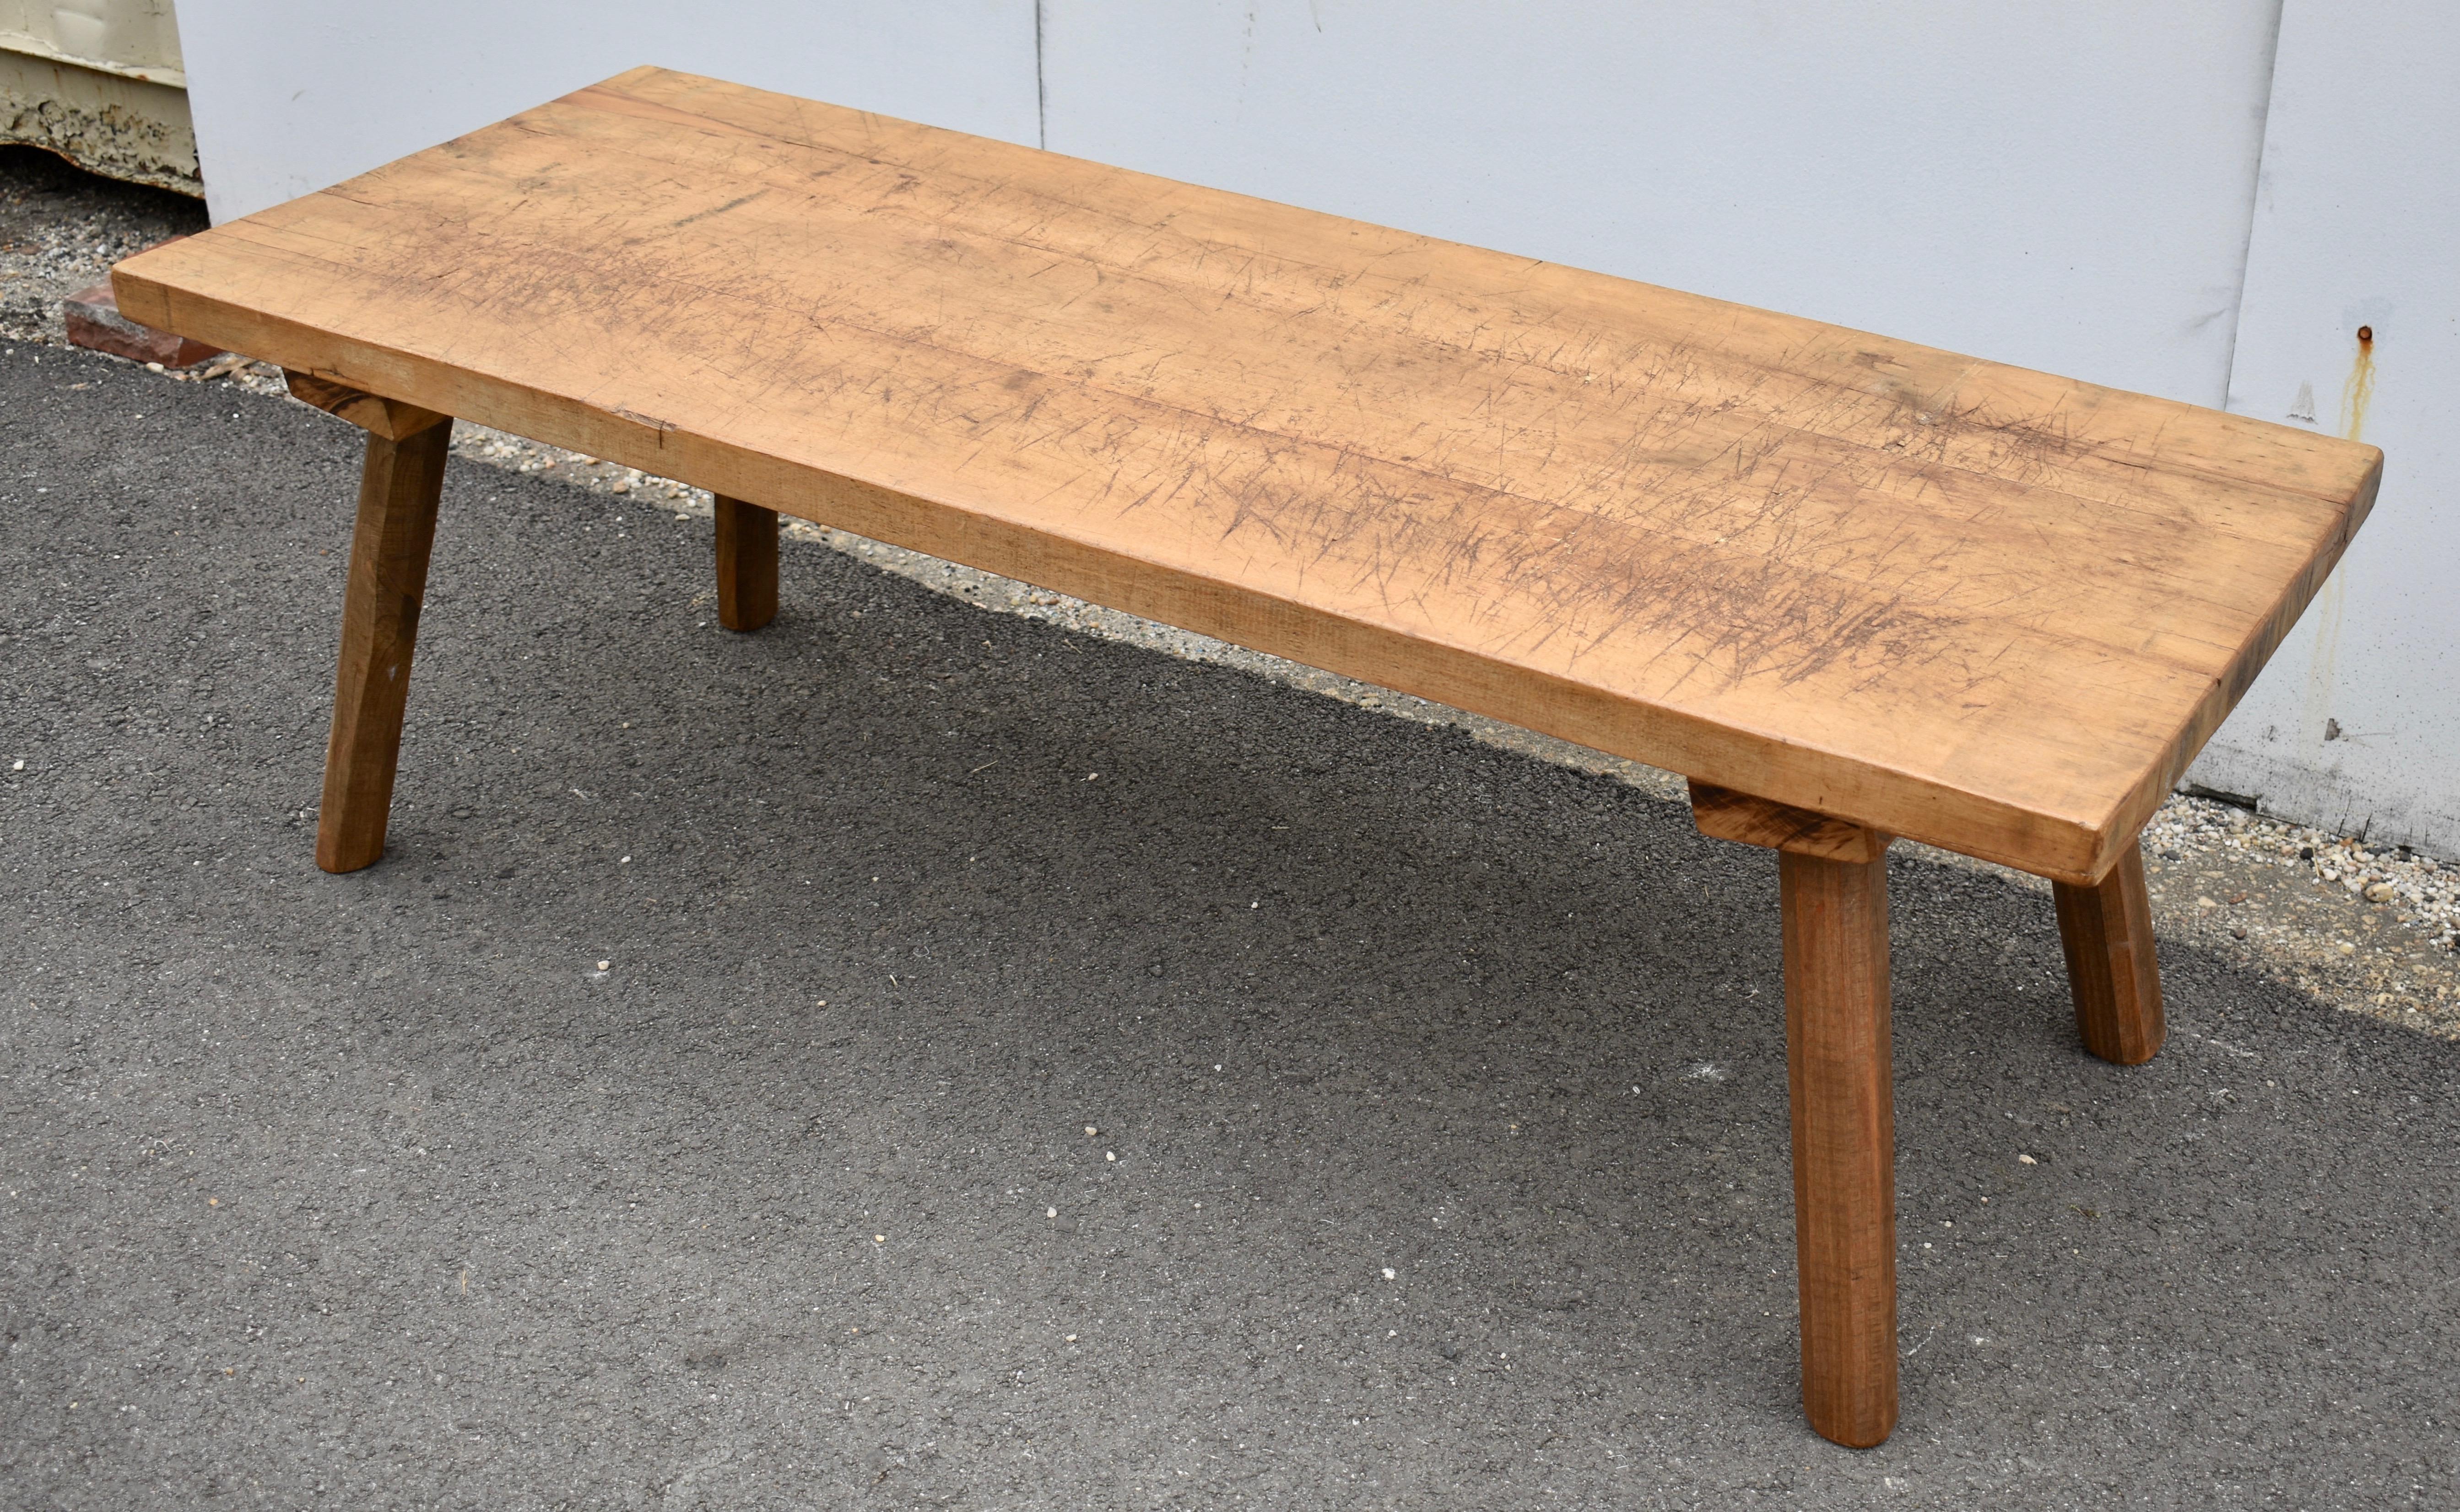 Elm and Oak Pig Bench Butcher's Block Coffee Table In Good Condition For Sale In Baltimore, MD